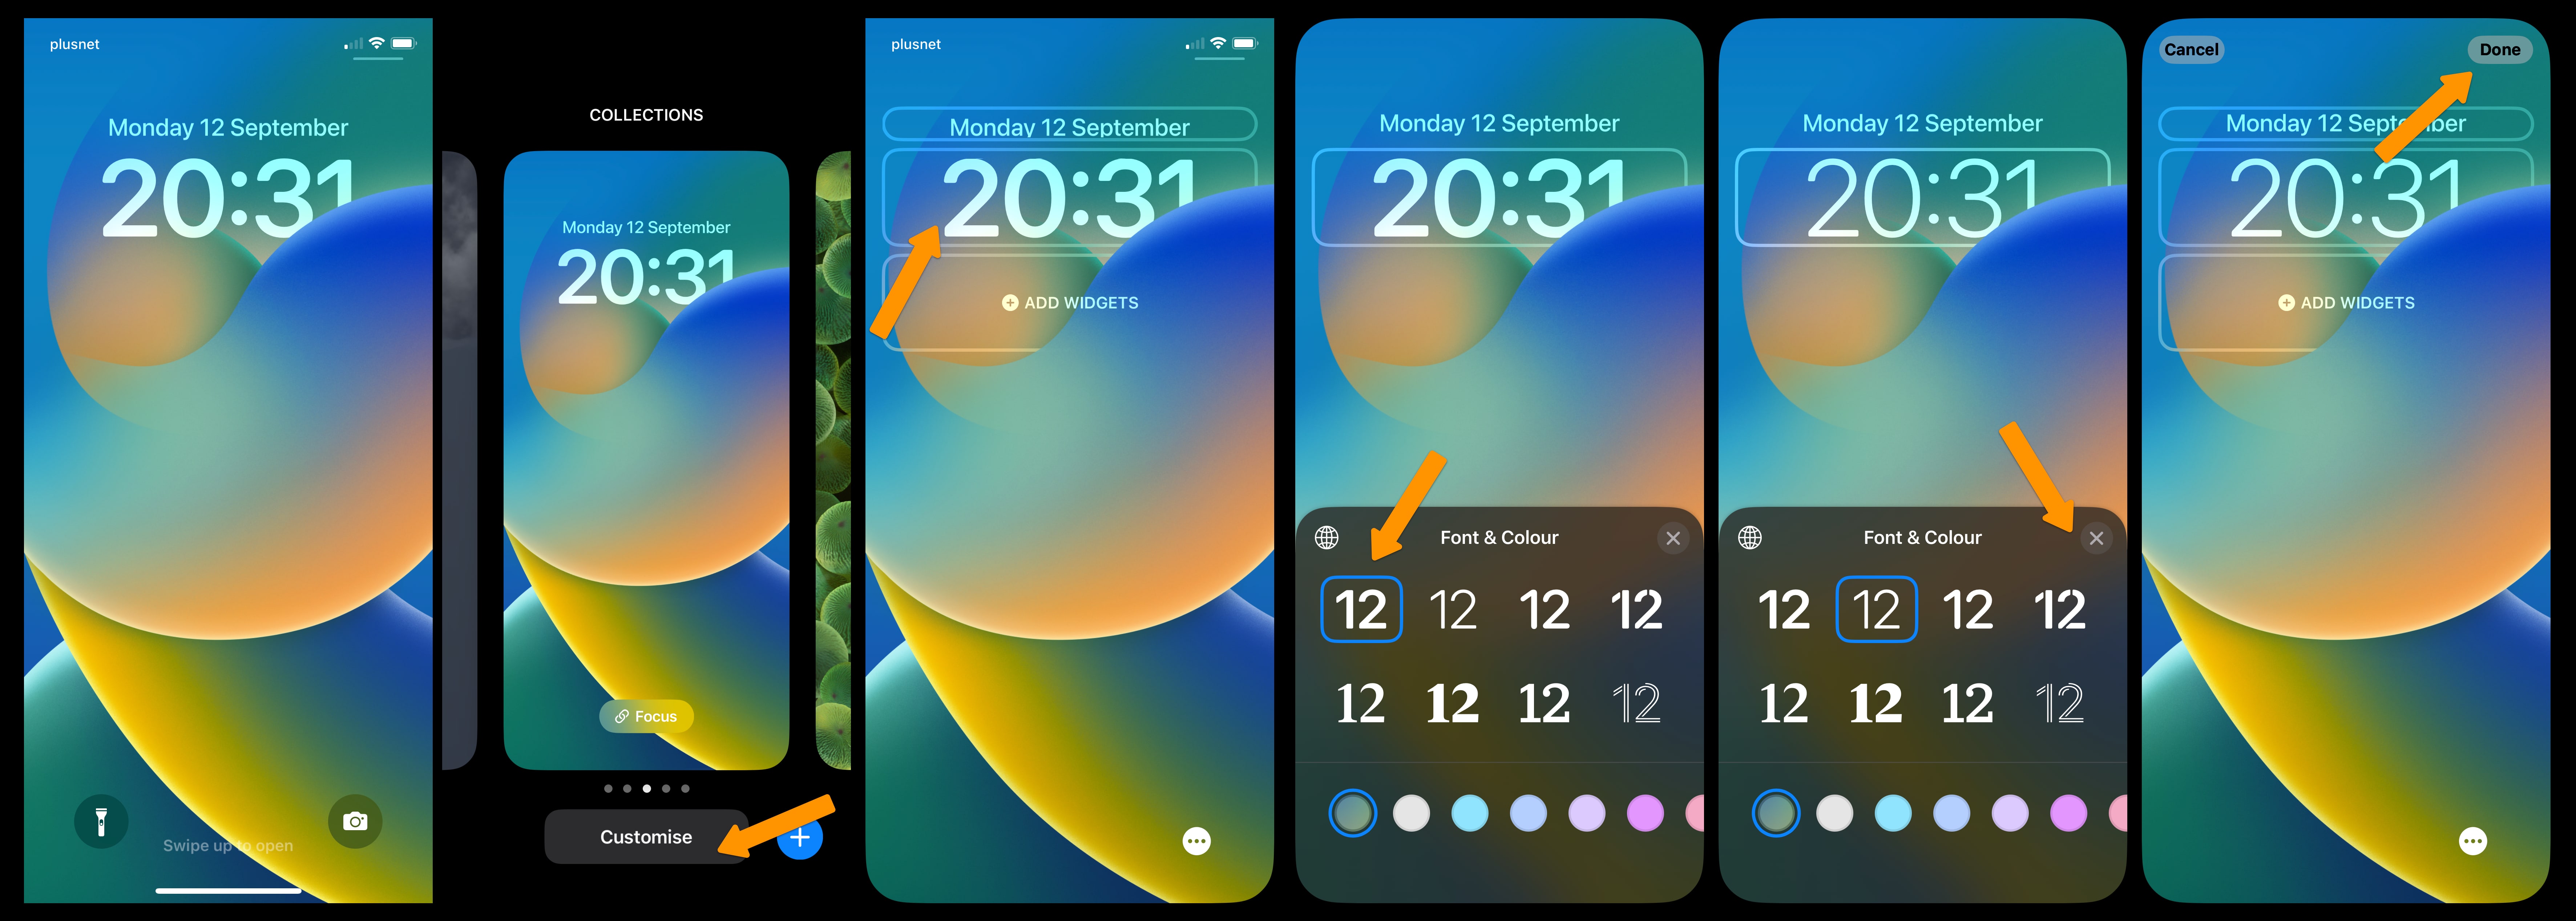 how-to-change-the-clock-font-on-the-ios-16-lock-screen-monday-daily